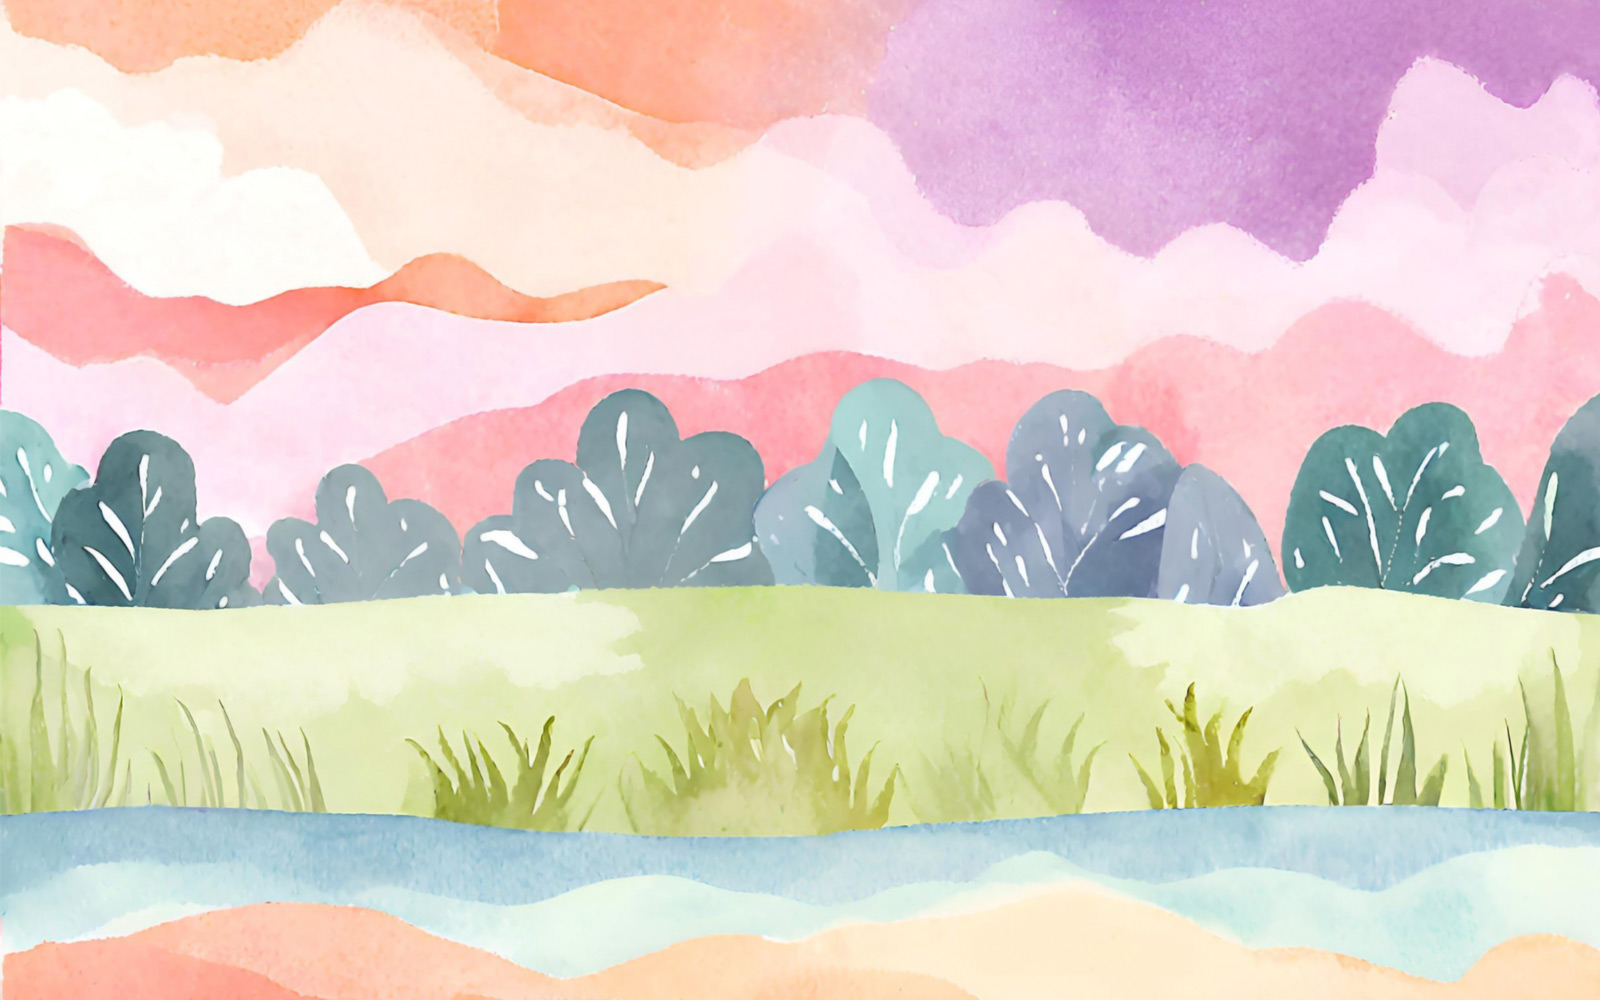 Abstract watercolor background. Hand-drawn illustration for your design